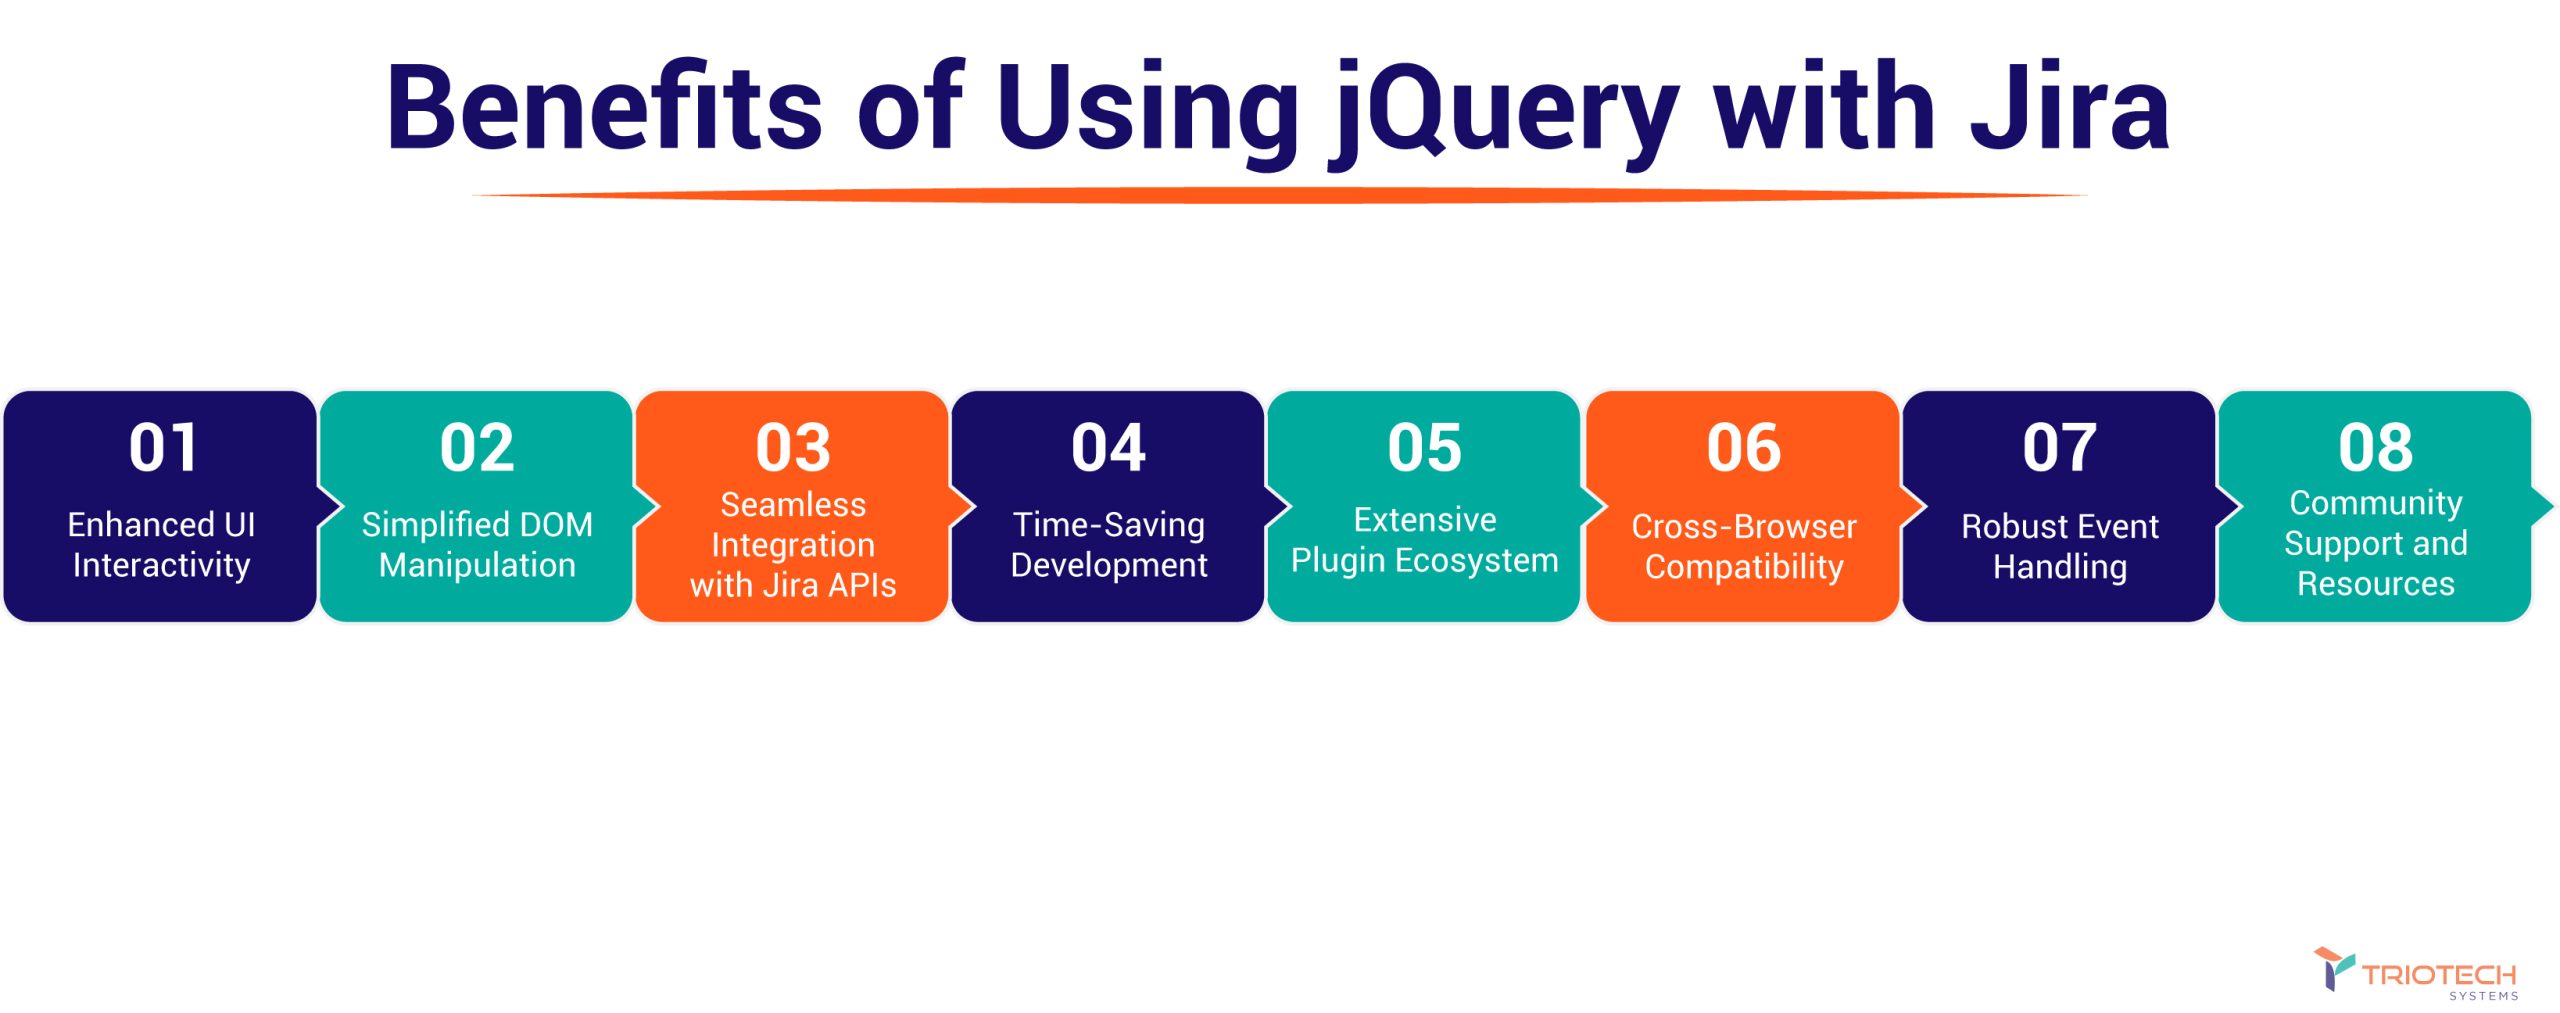 Benefits of using jQuery